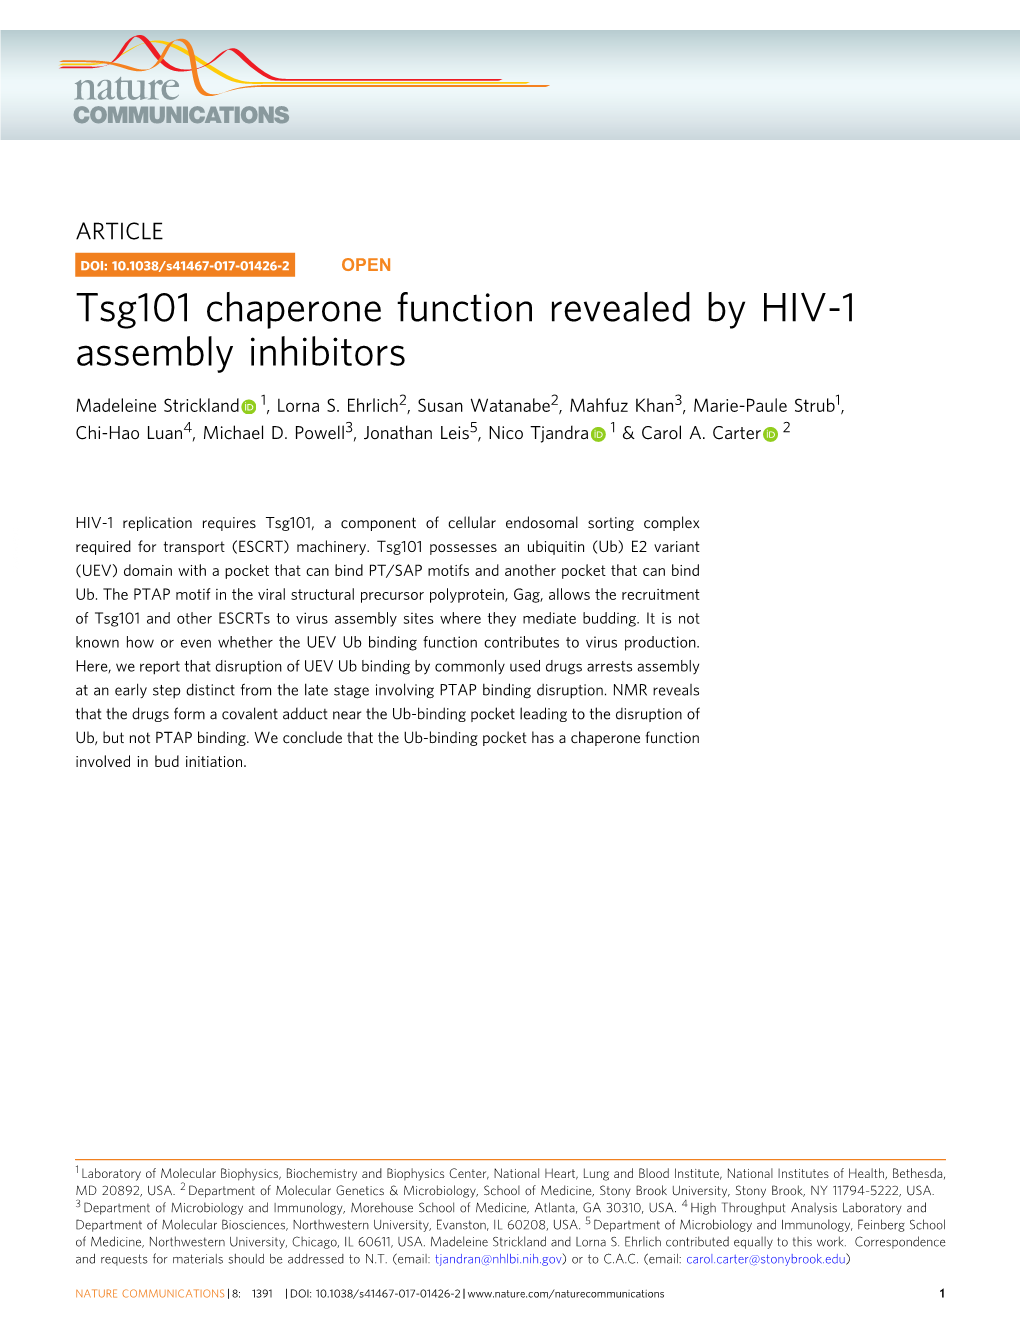 Tsg101 Chaperone Function Revealed by HIV-1 Assembly Inhibitors